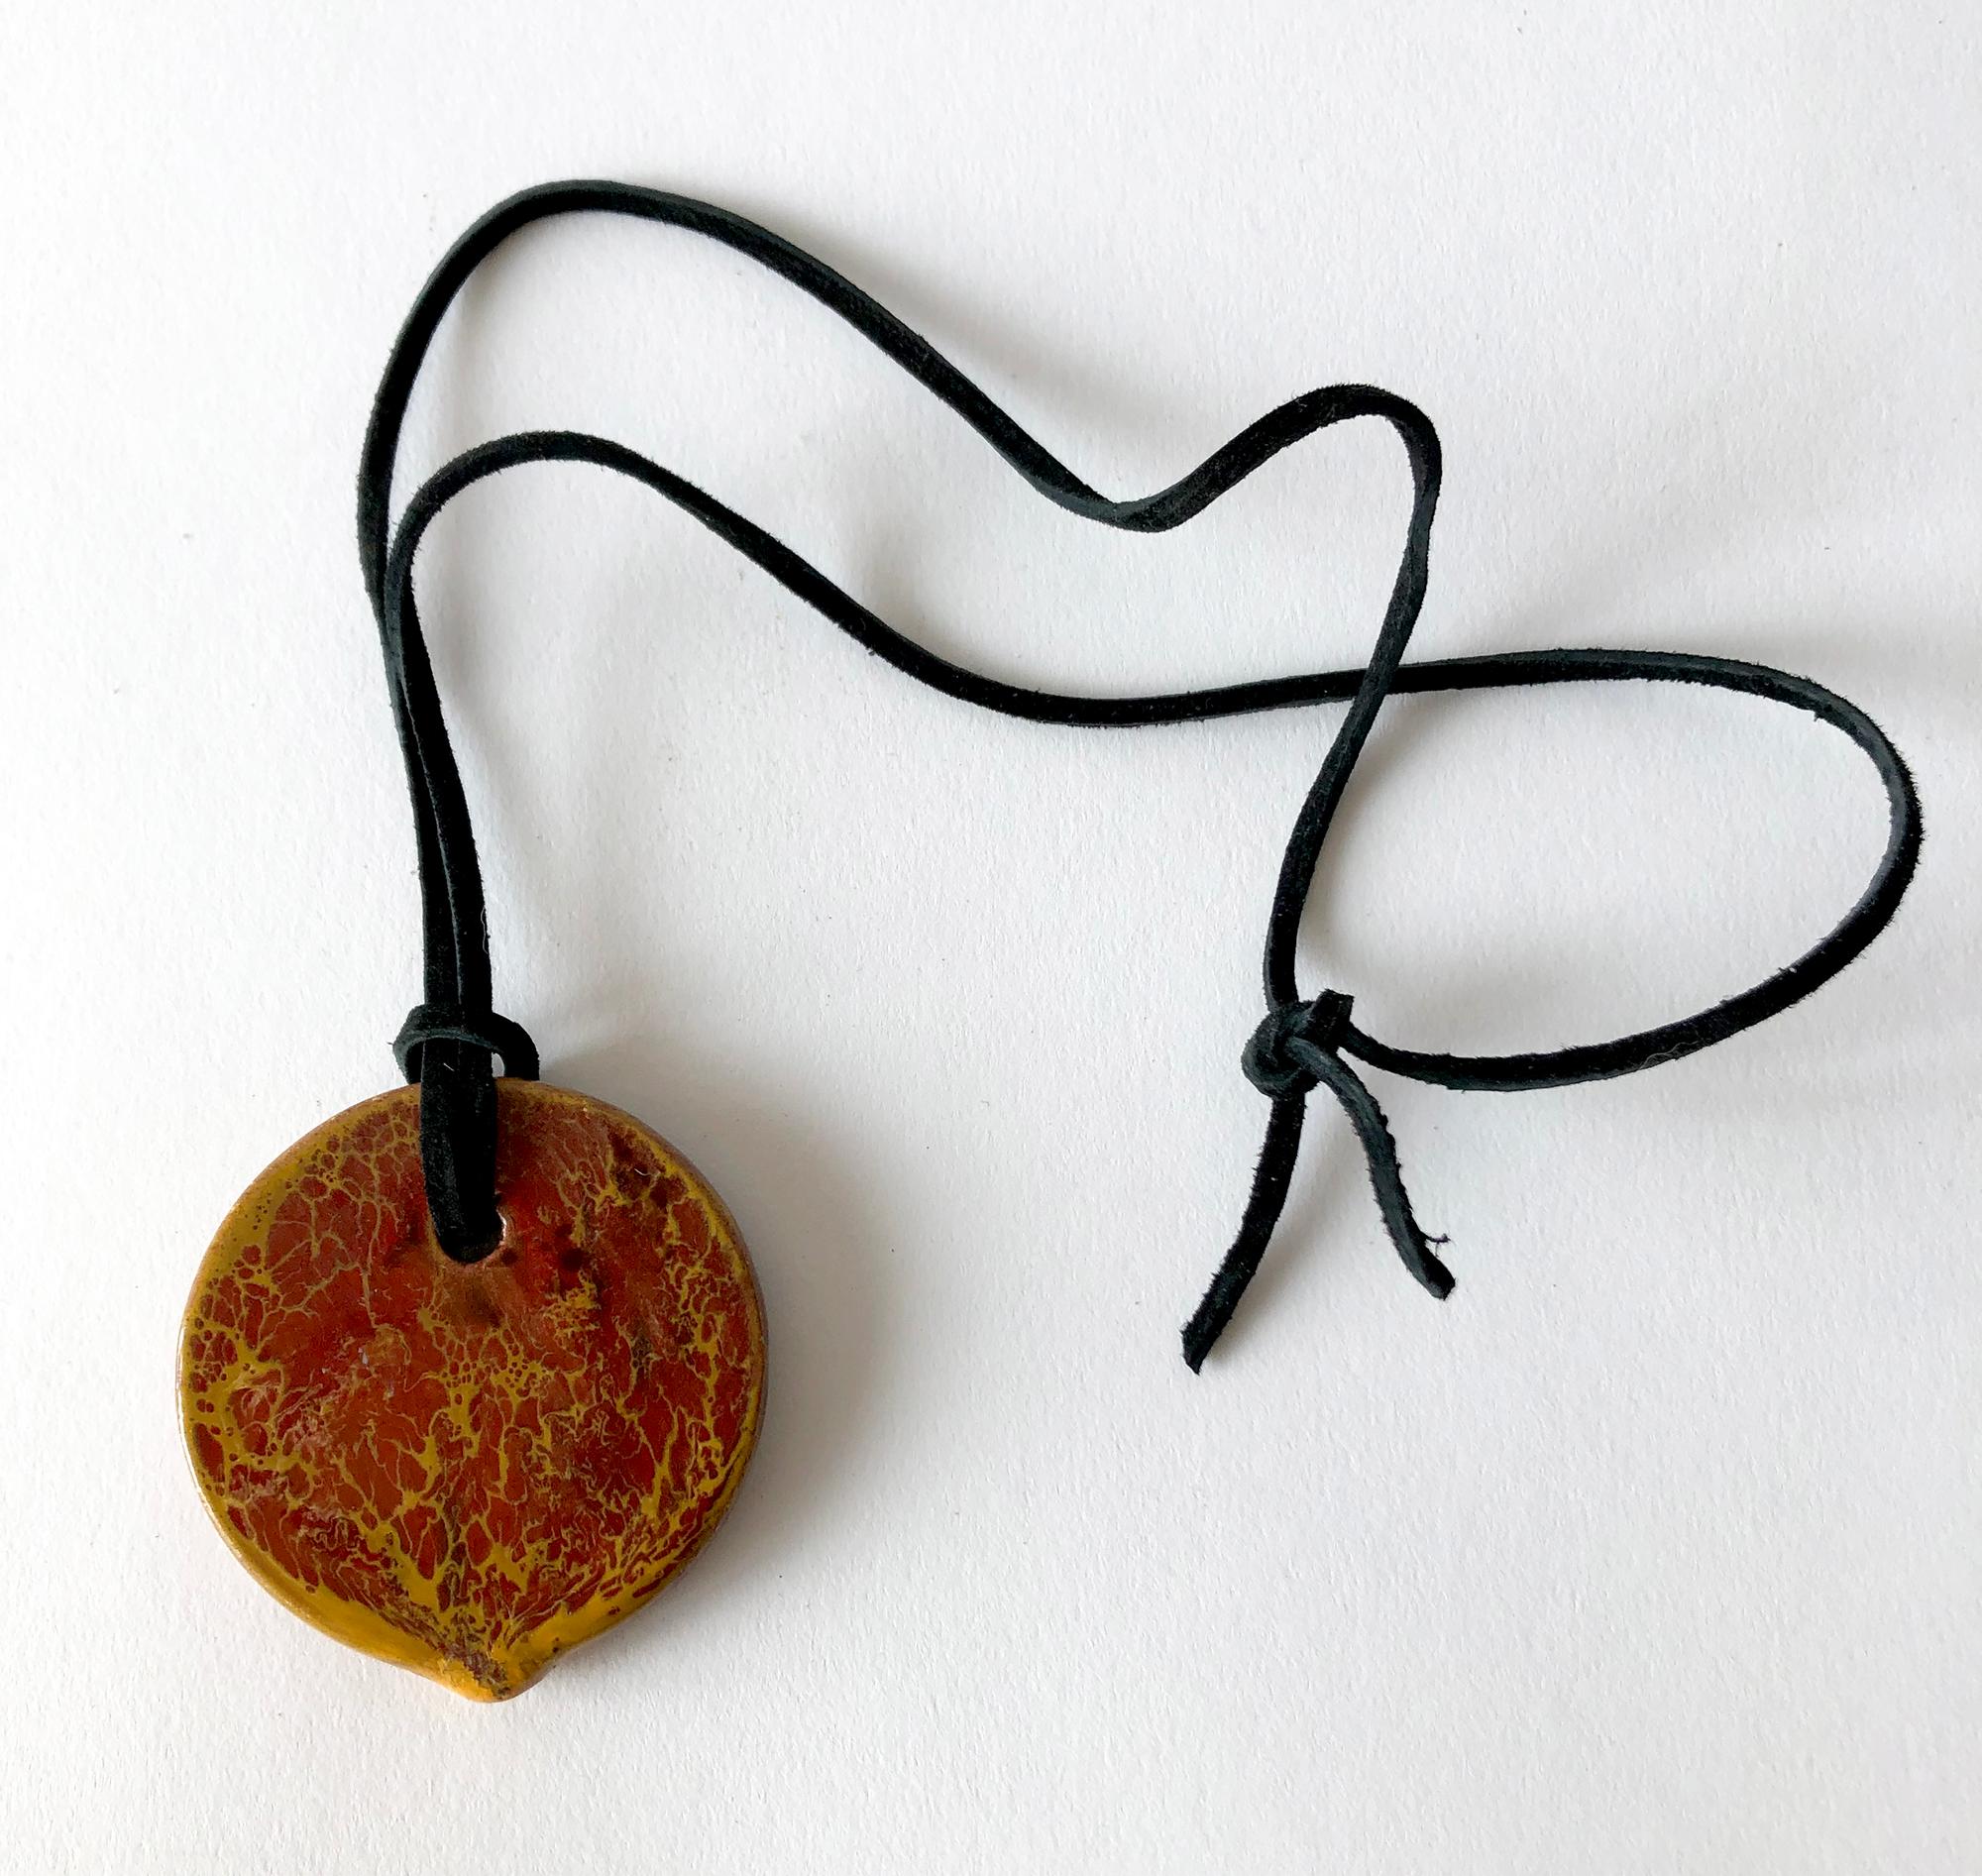 Flattened ceramic bead on suede strap by Doyle Lane of Los Angeles, California. Bead measures 2 3/8